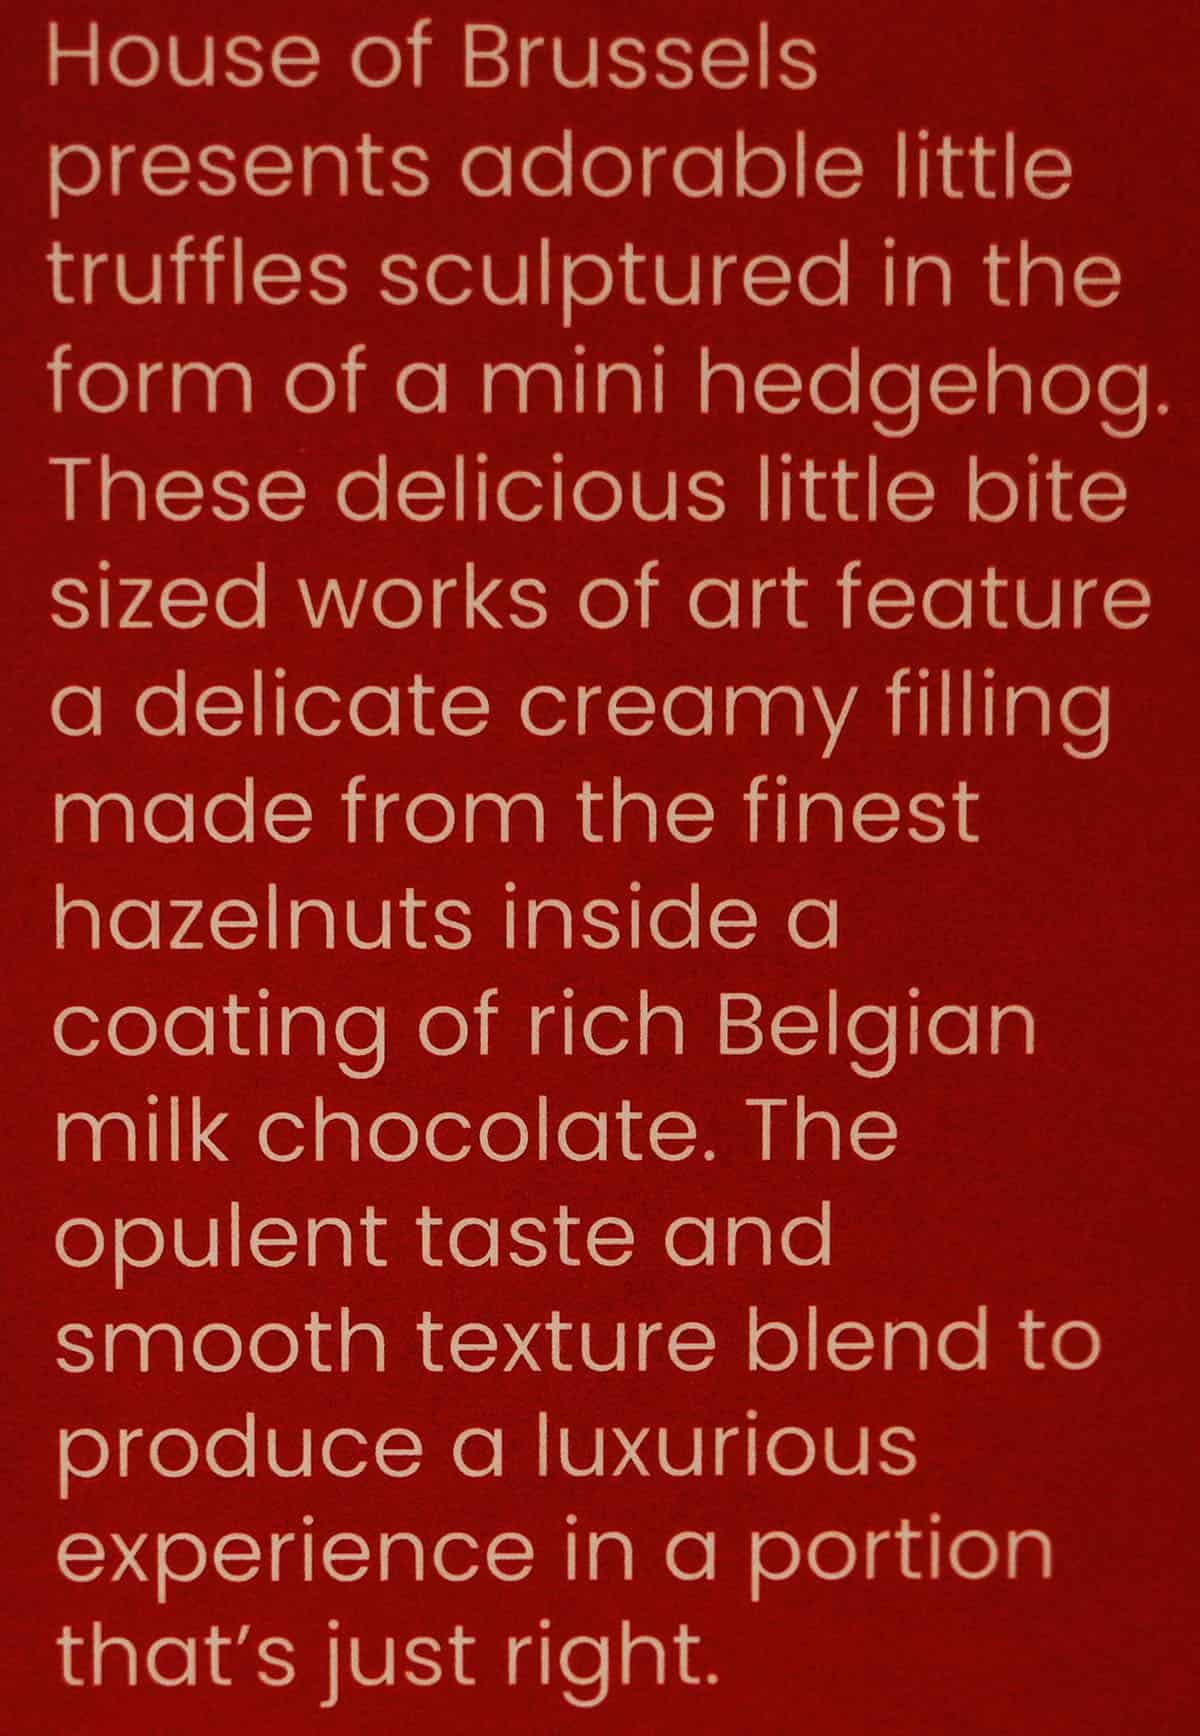 Image of the hedgehog product description from the box. 